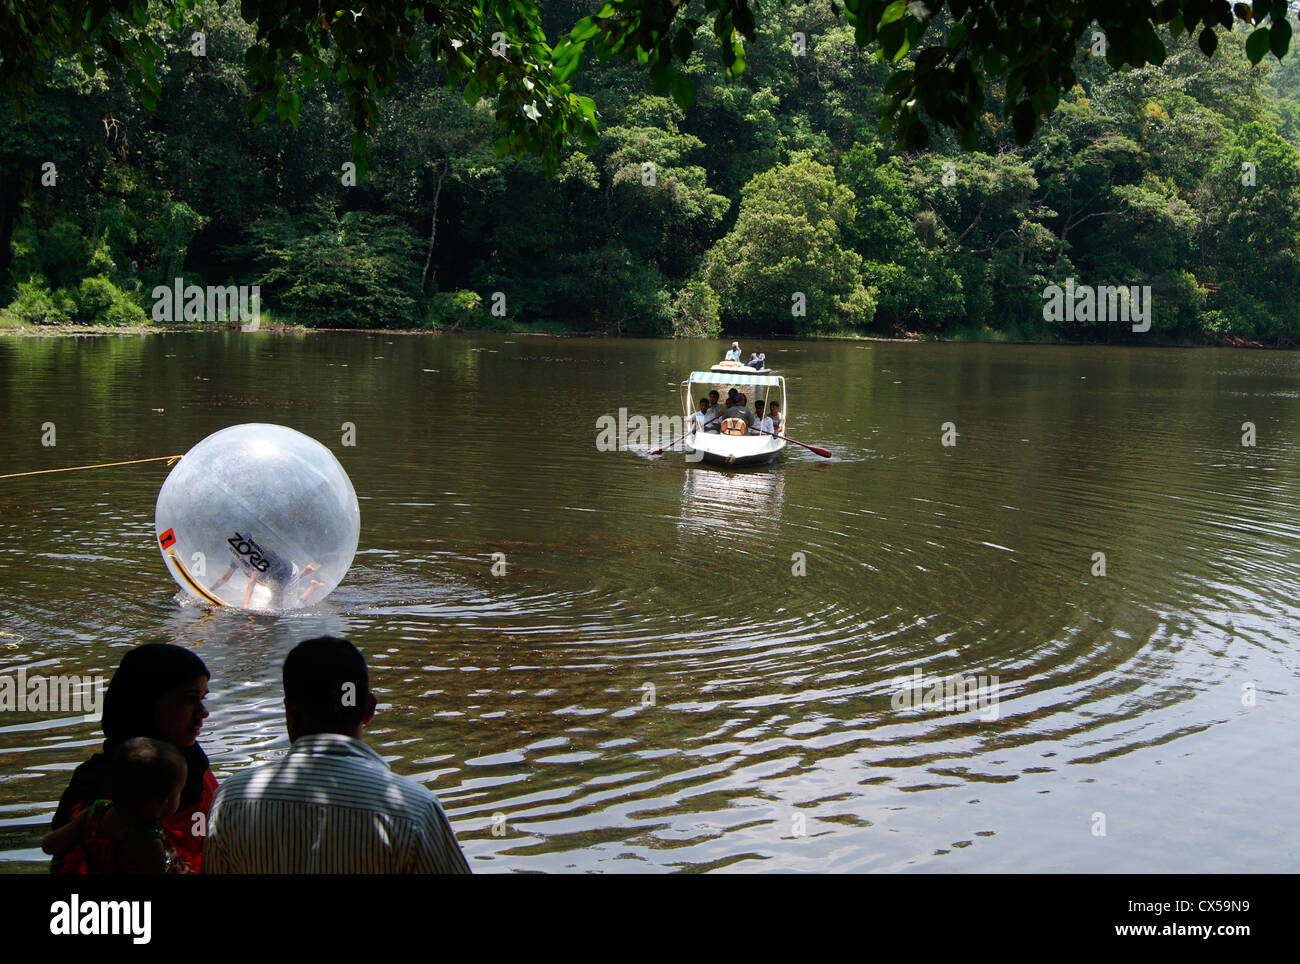 Pookode or pookot lake scenic freshwater lakes in Wayanad at Kerala India surrounded by forests.Boating and zorbing ball in Lake Stock Photo